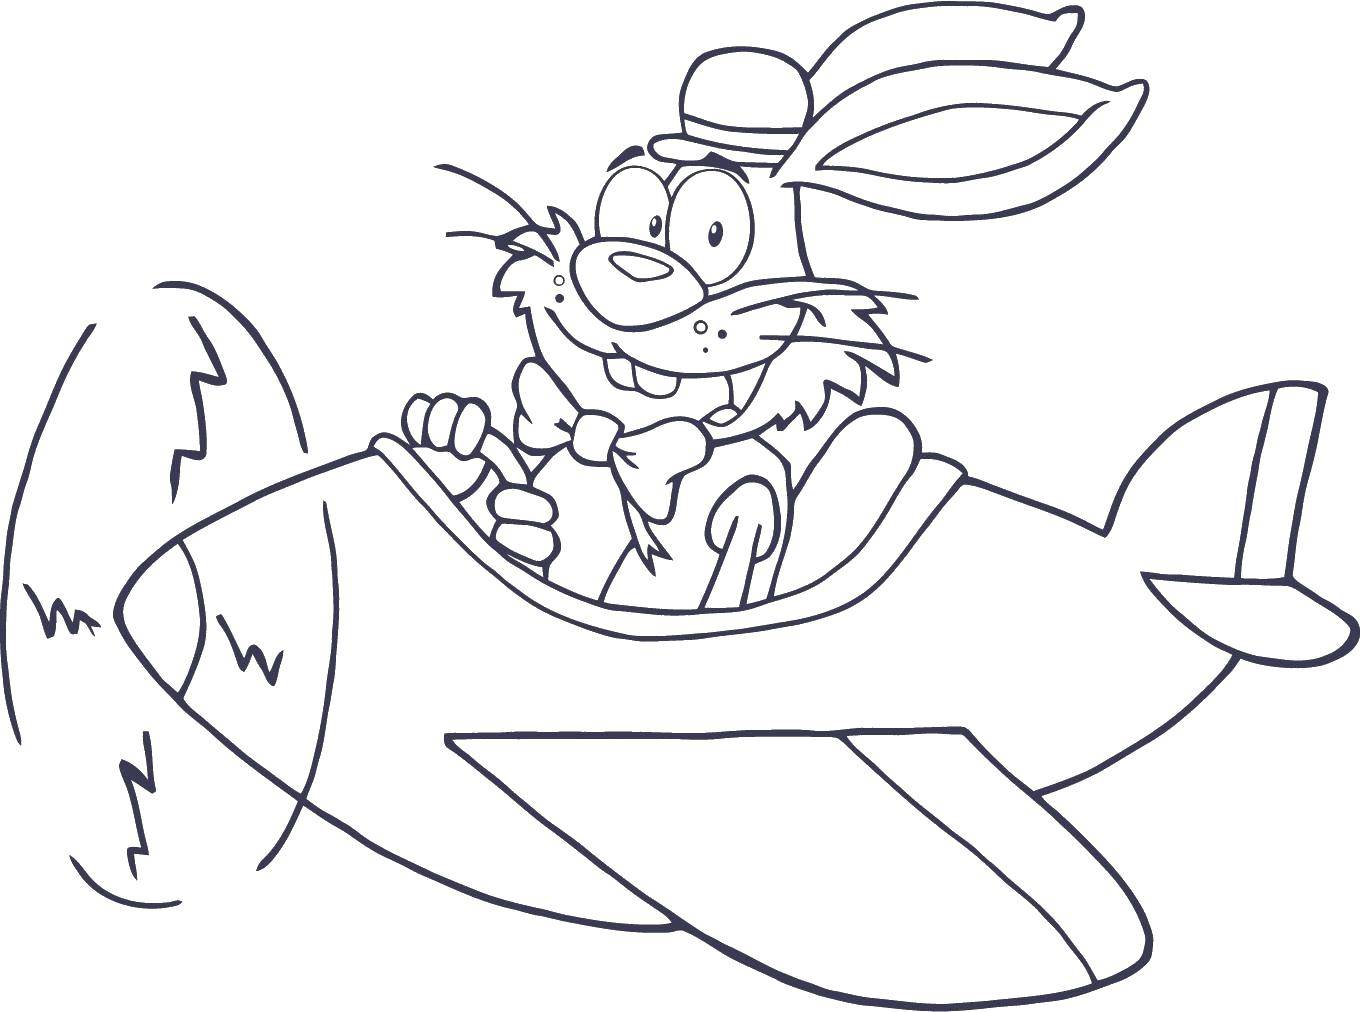 Coloring Bunny pilot. Category The planes. Tags:  Plane.